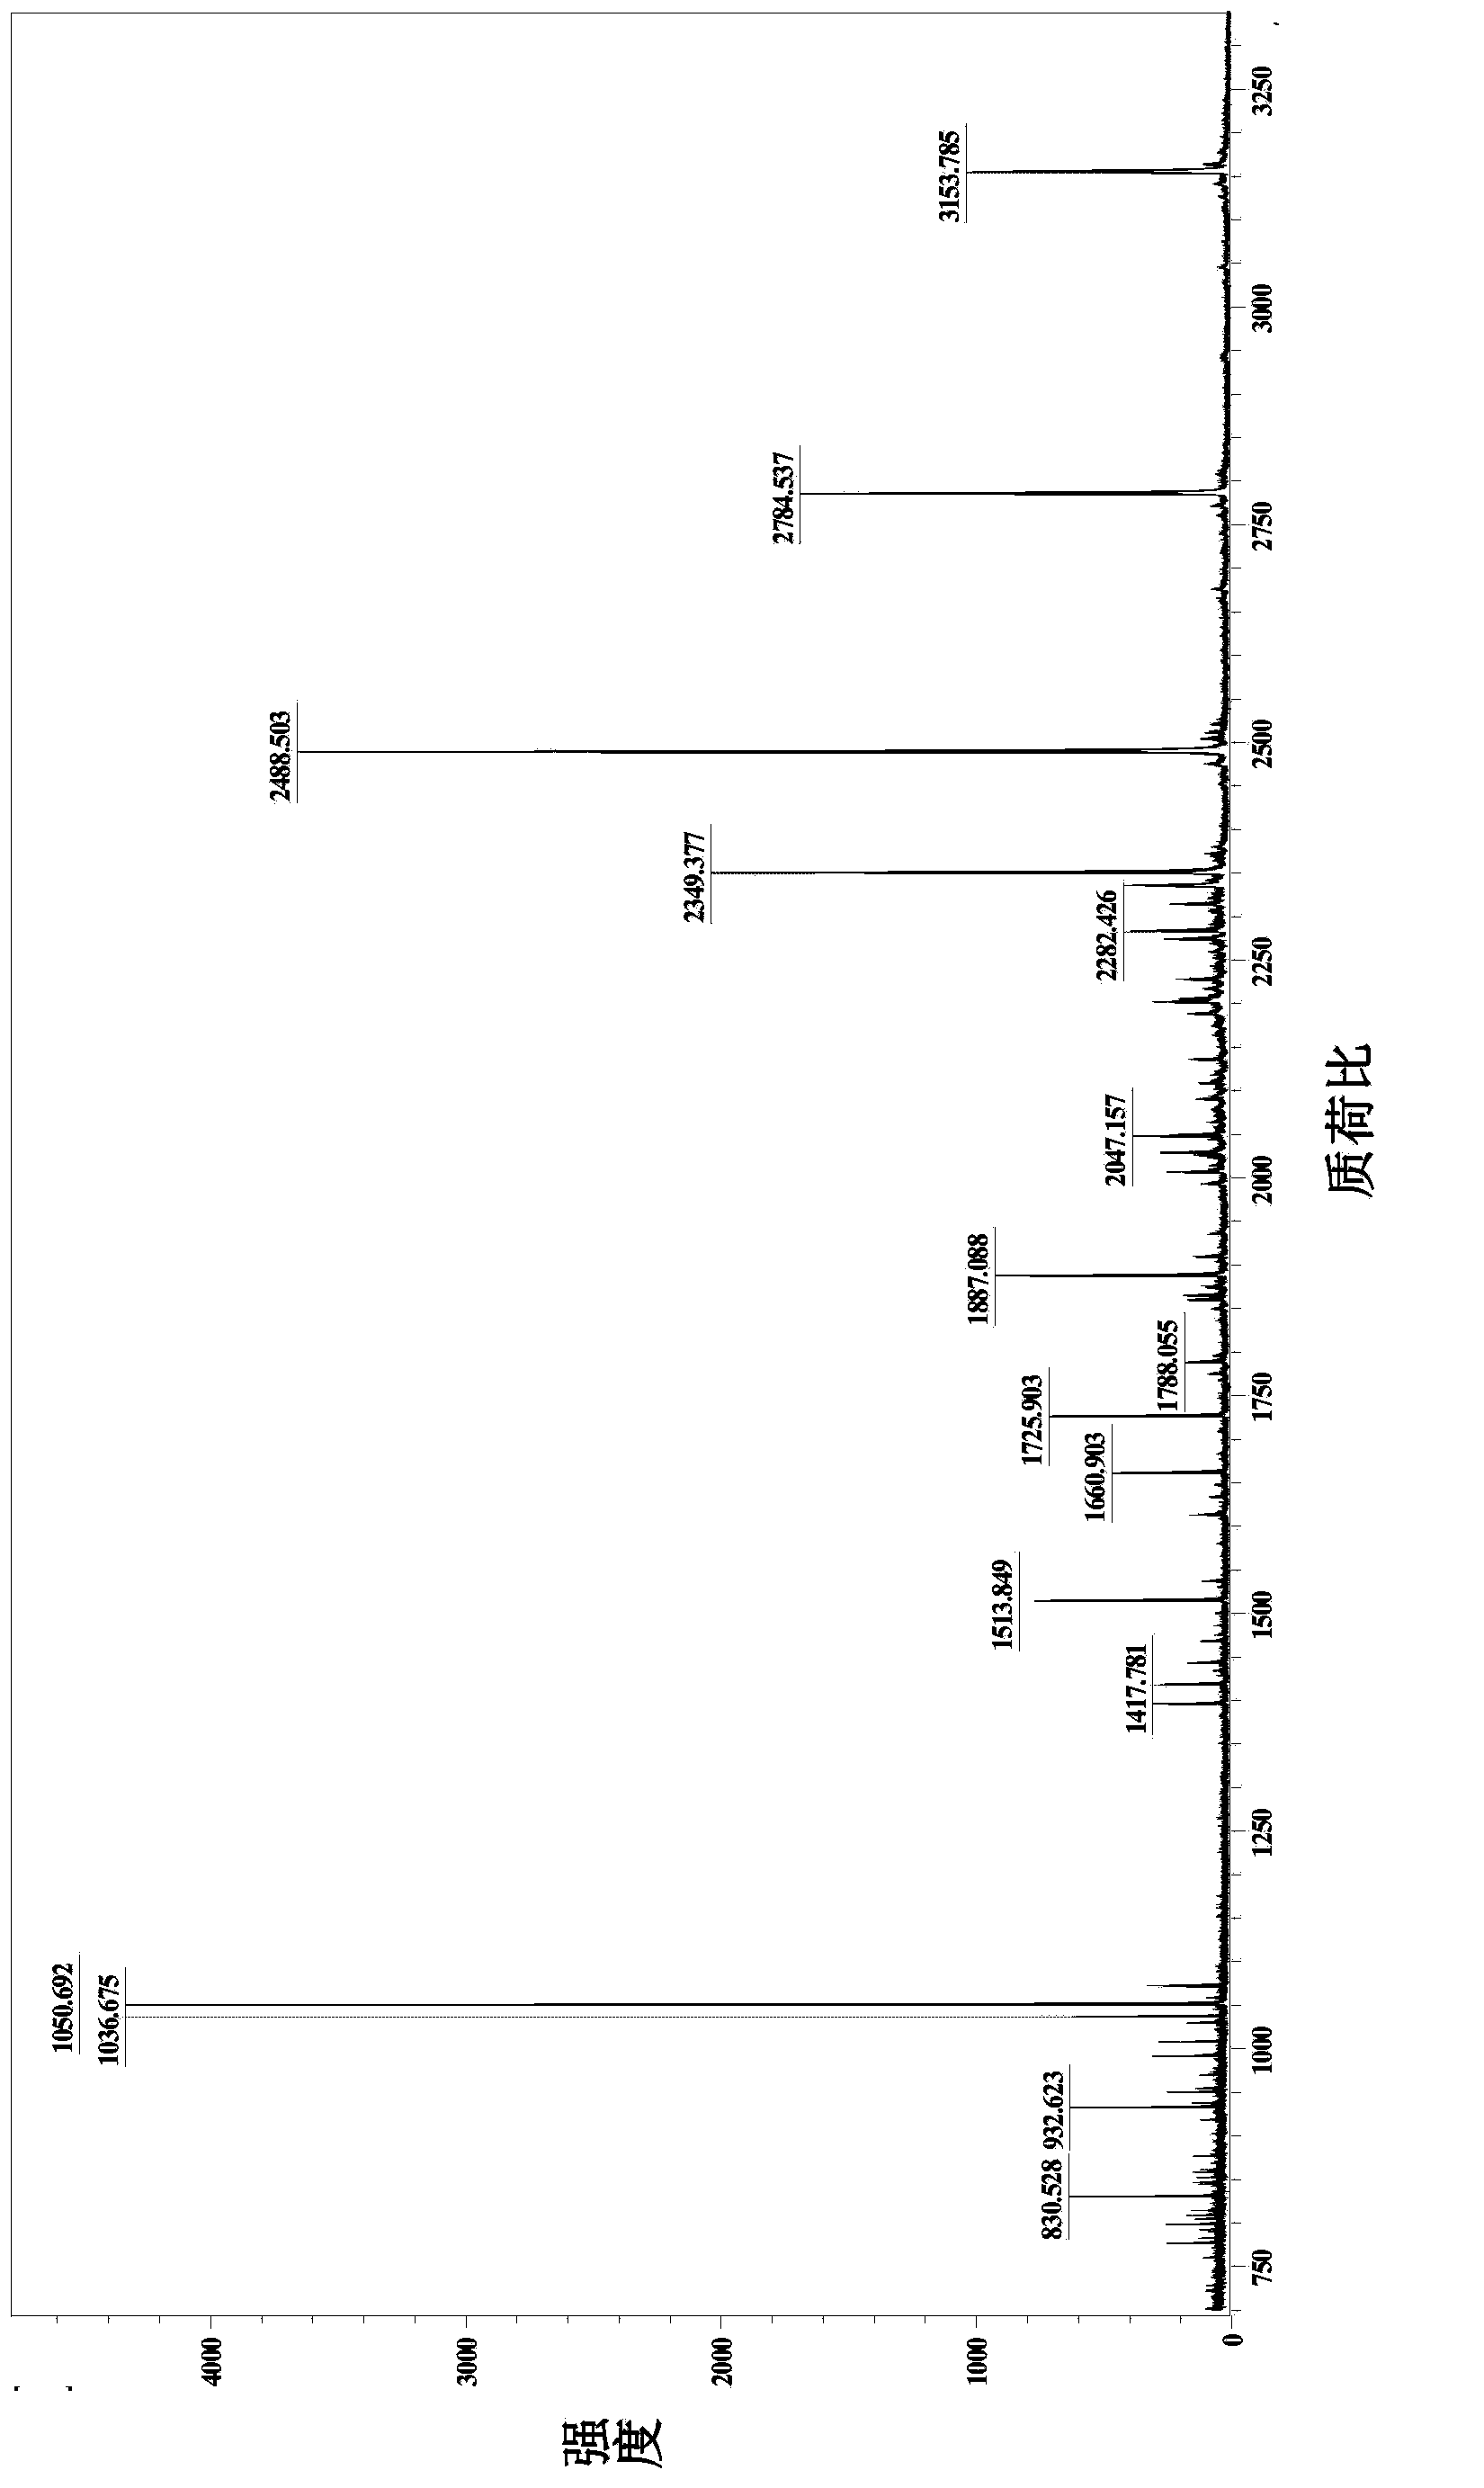 Integrated protein C-terminal enrichment method